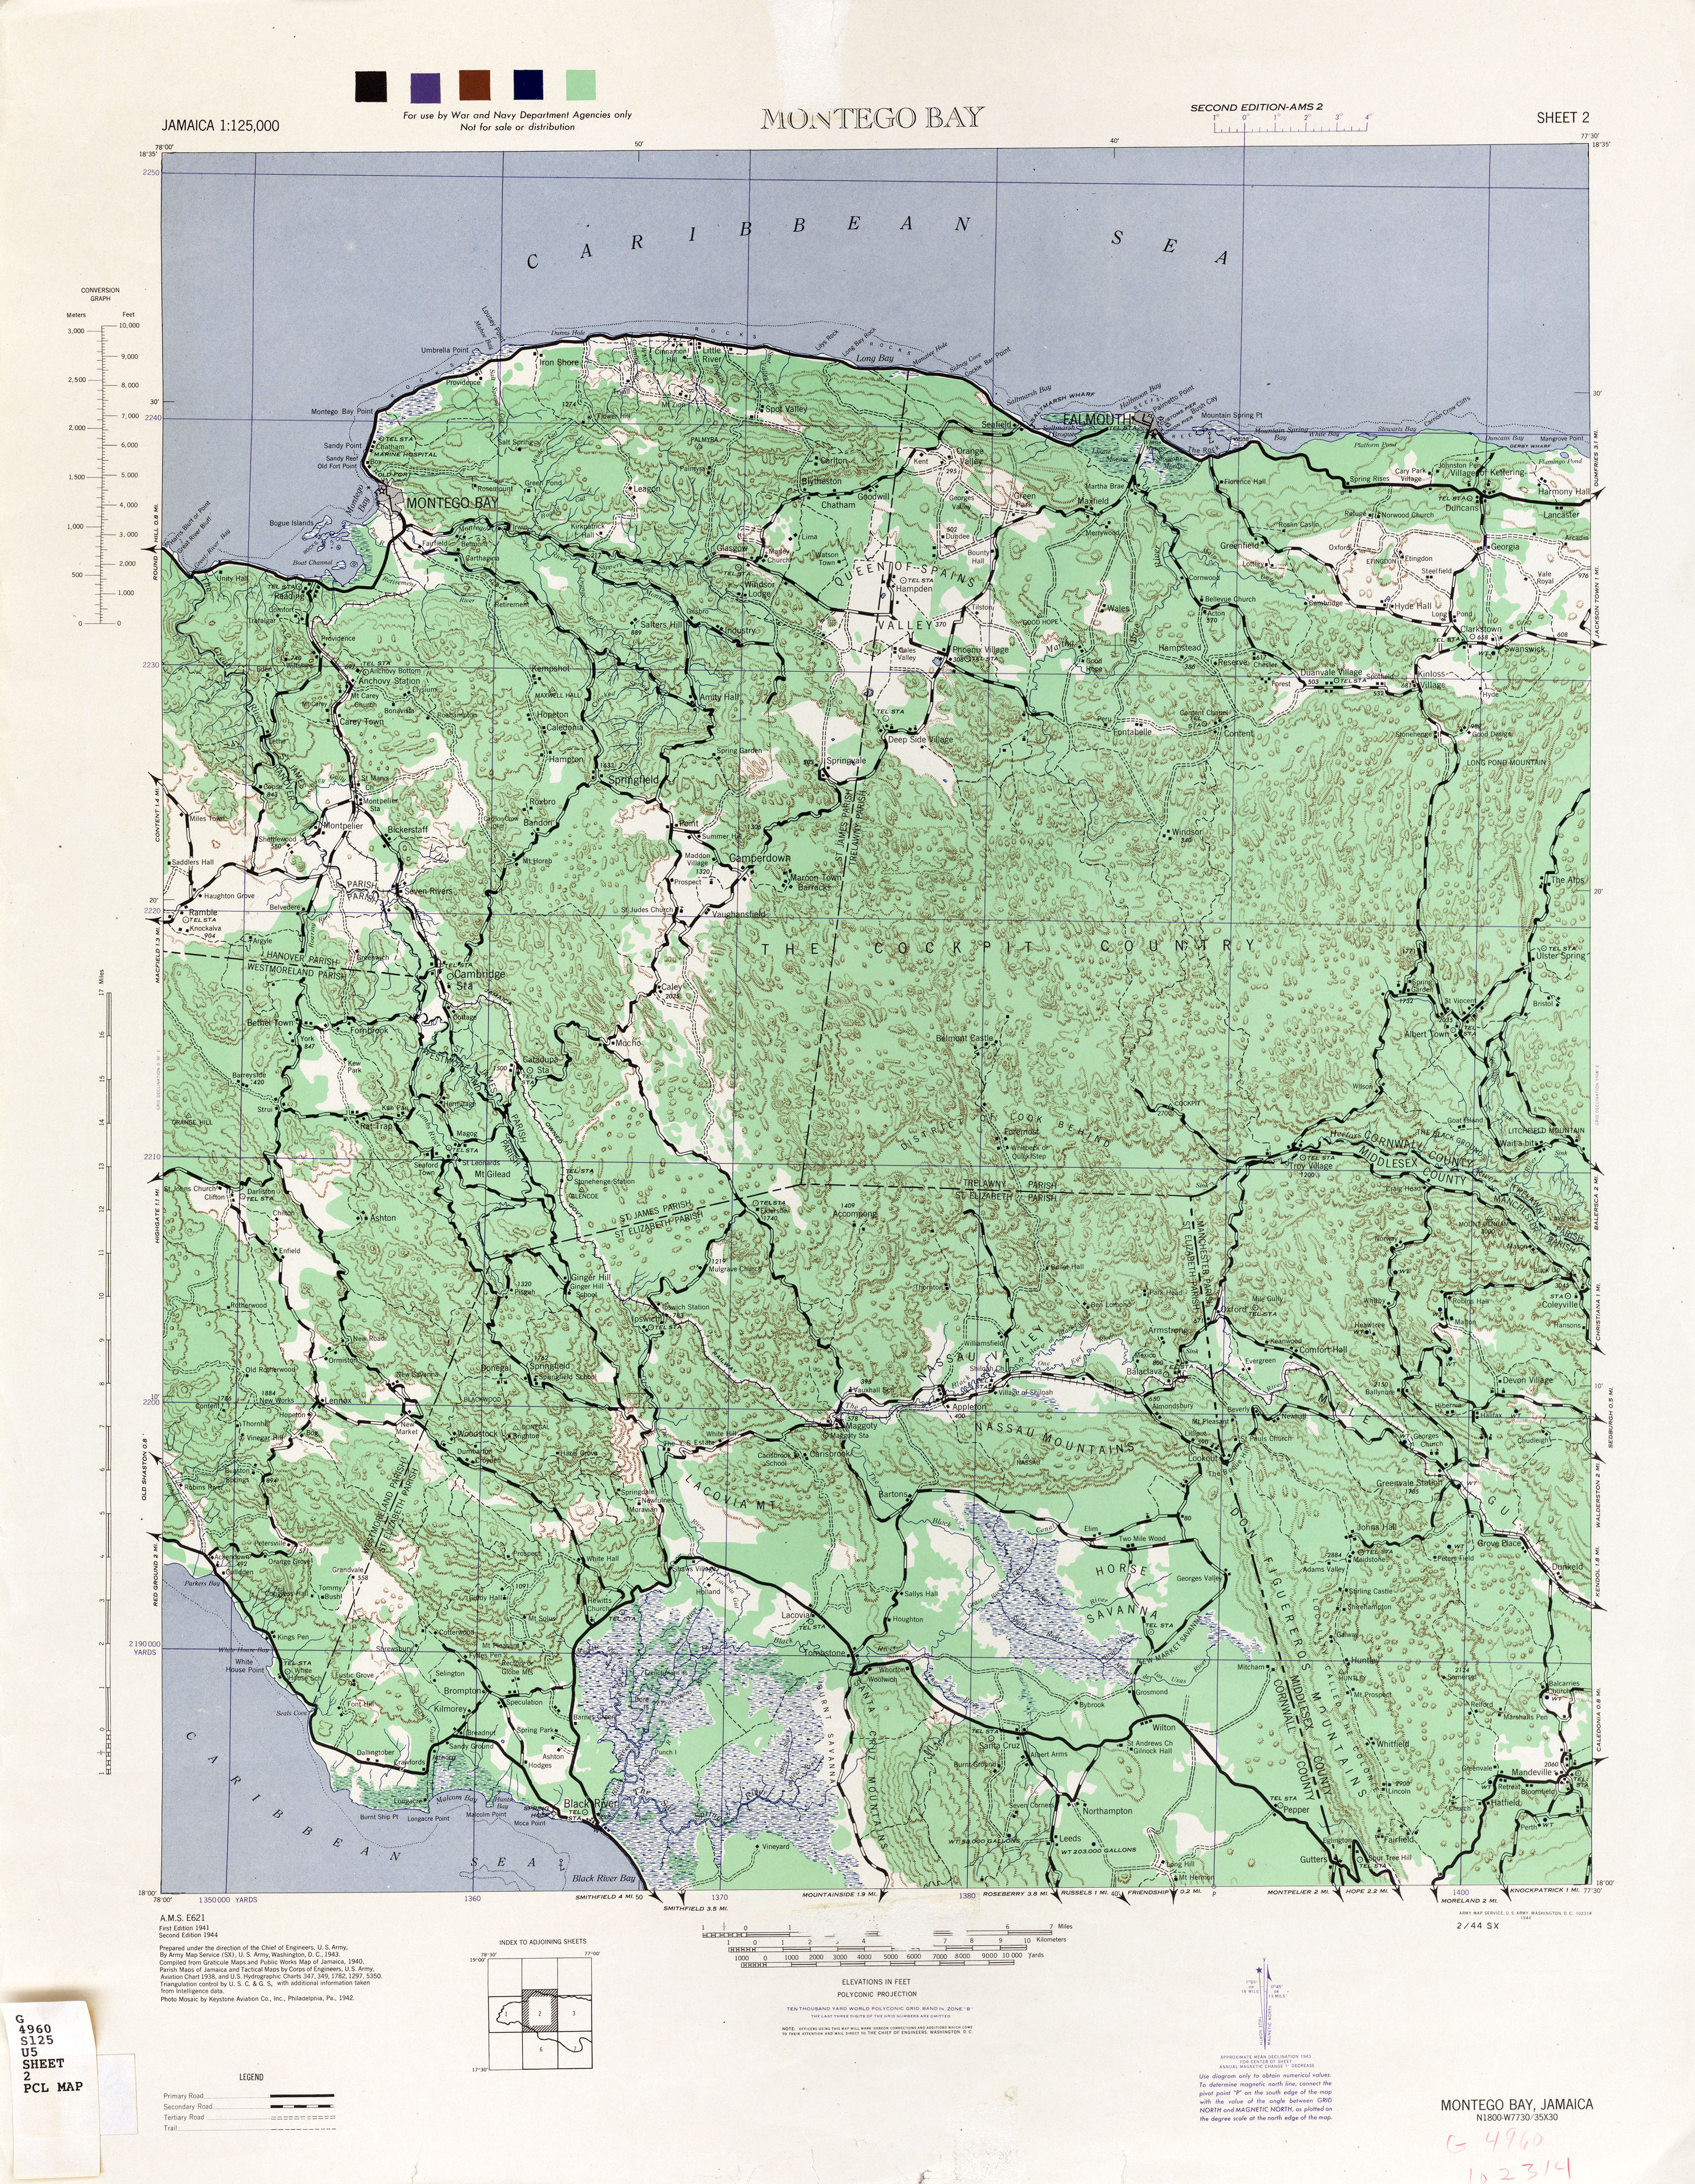 Jamaica AMS Topographic Maps - Perry-Castañeda Map Collection - UT Library Online